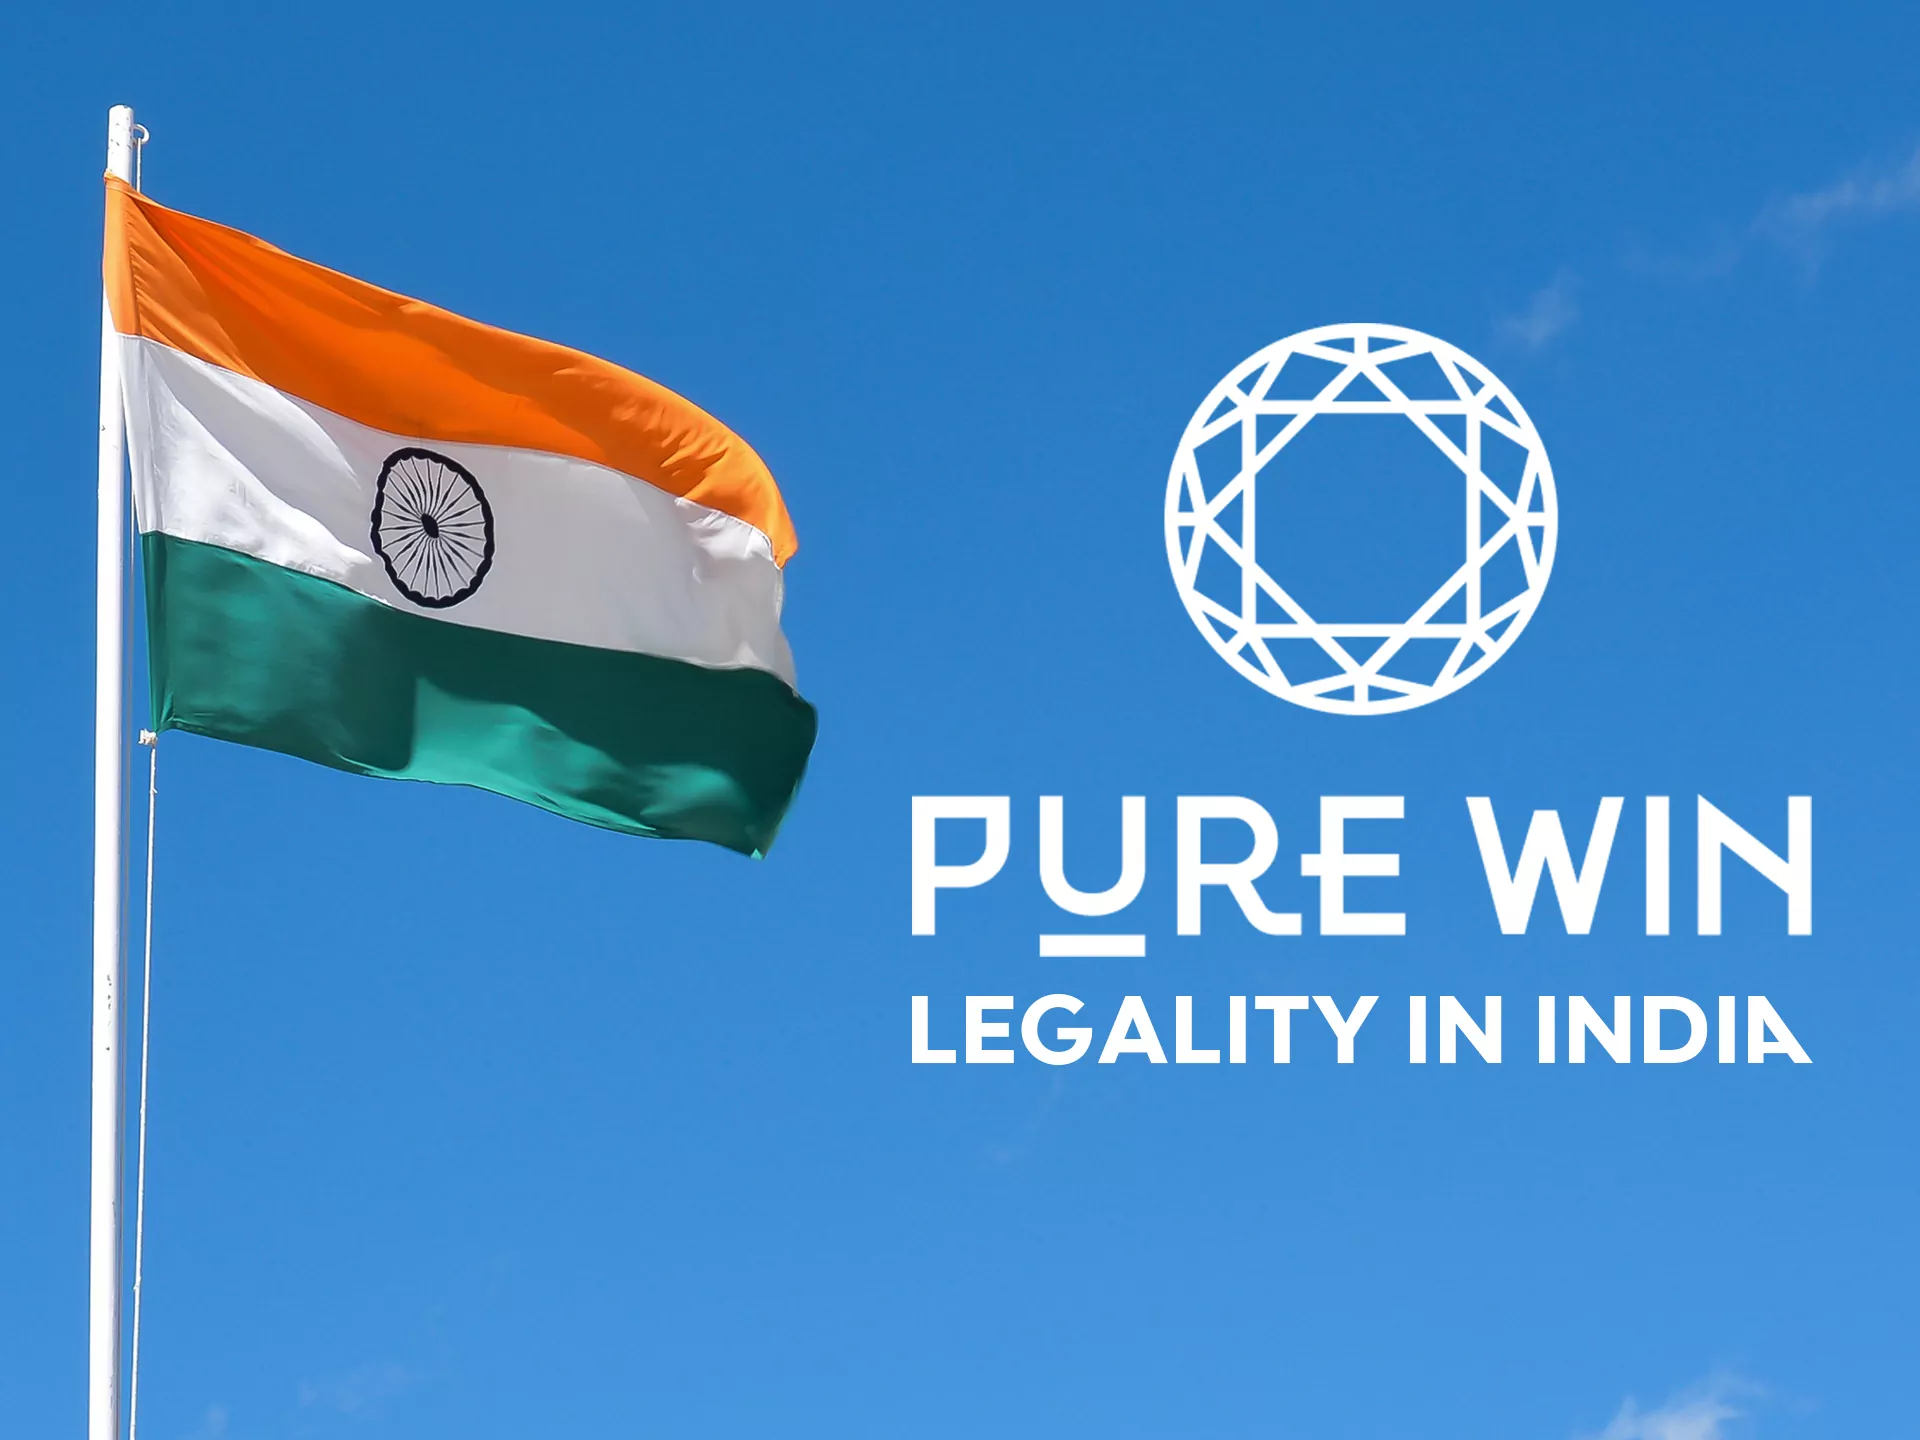 Pure Win is legal in India.